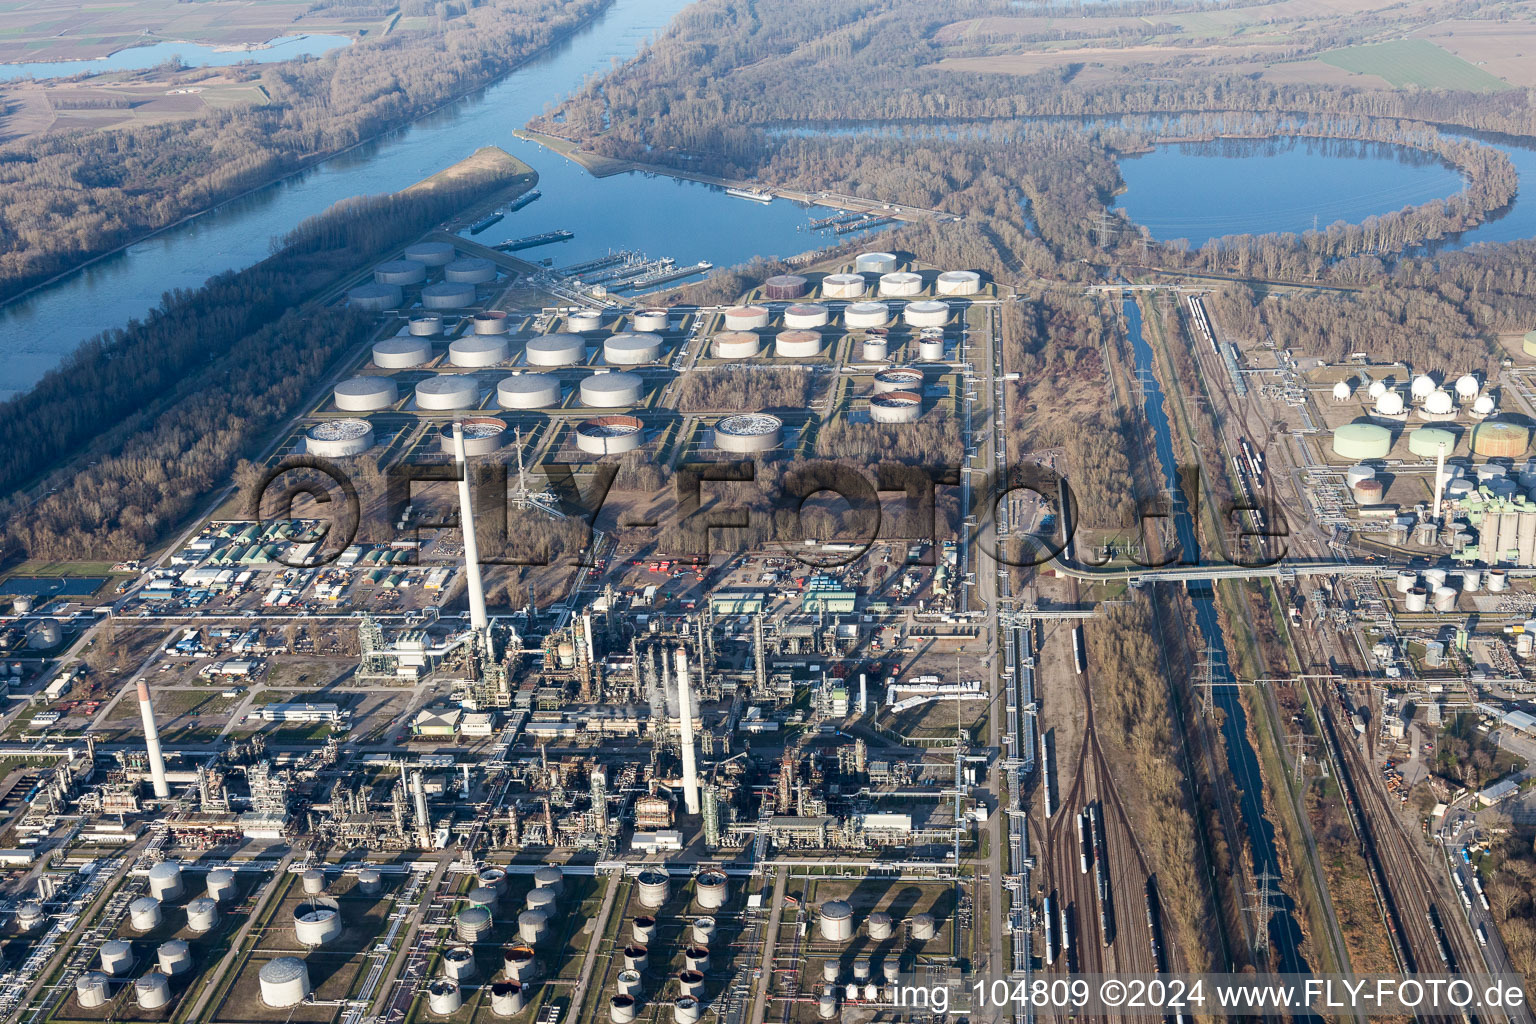 MIRO oil refinery in the district Knielingen in Karlsruhe in the state Baden-Wuerttemberg, Germany viewn from the air